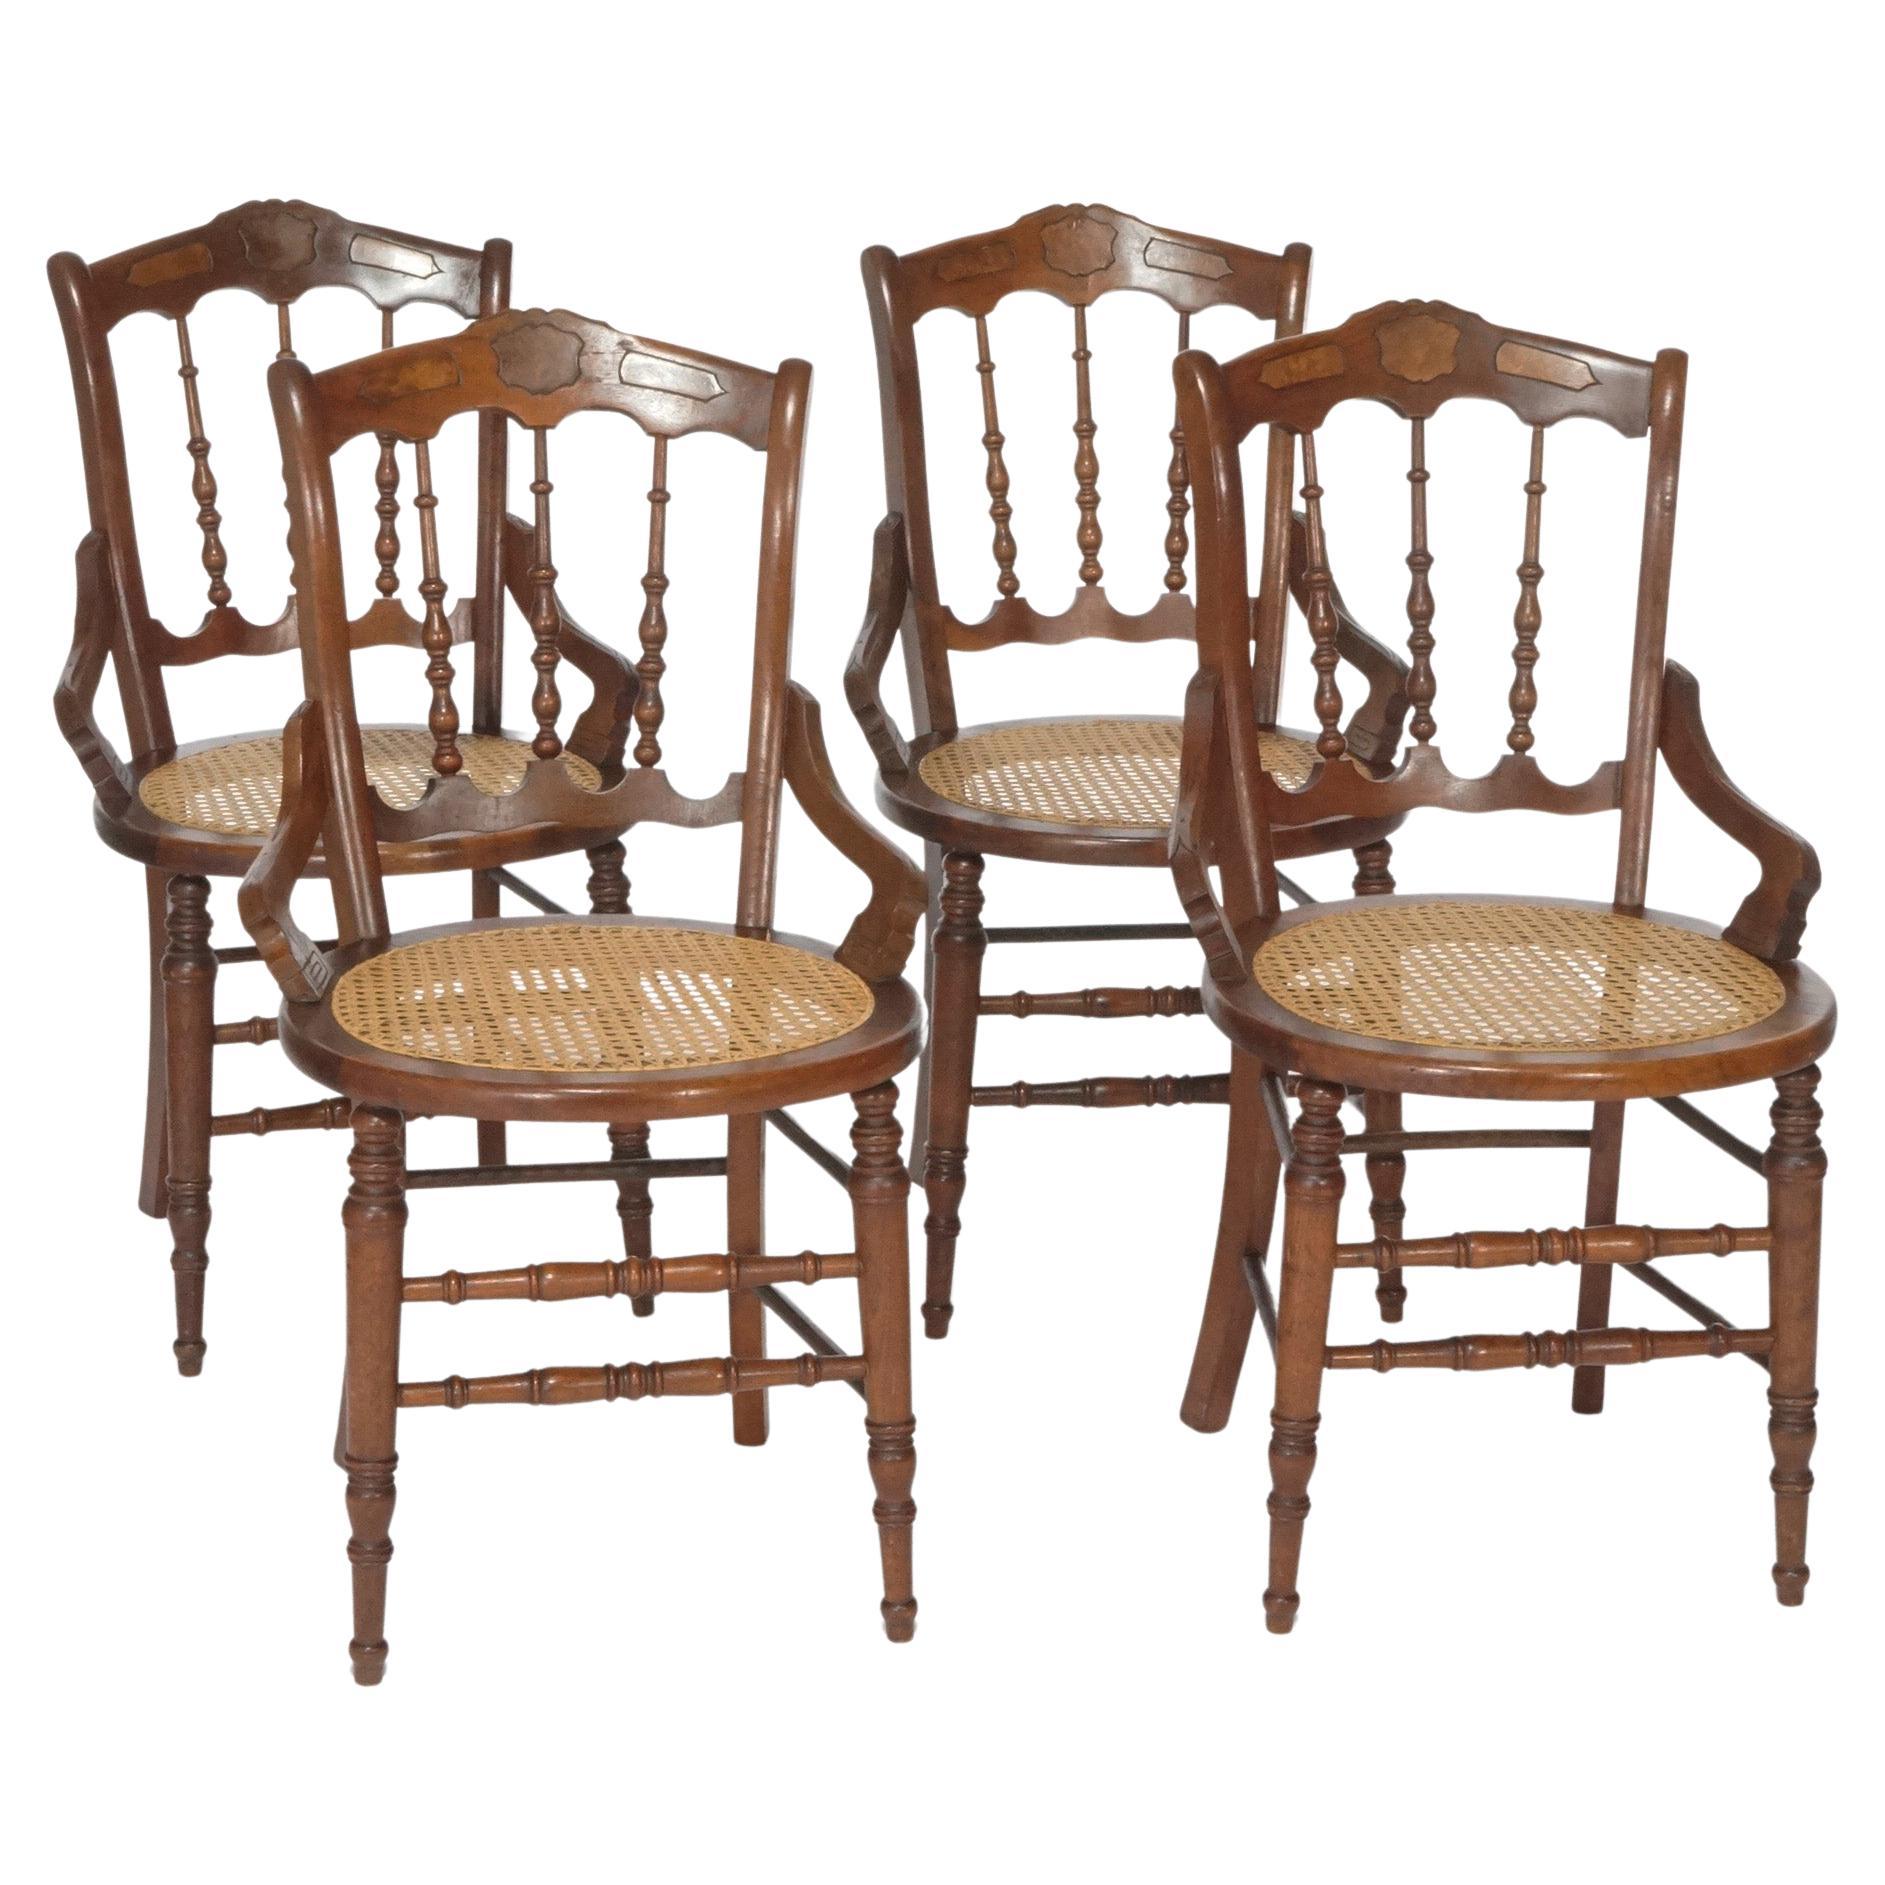 Antique Set of Four Victorian Walnut & Pressed Cane Dining Chairs, Circa 1890 For Sale